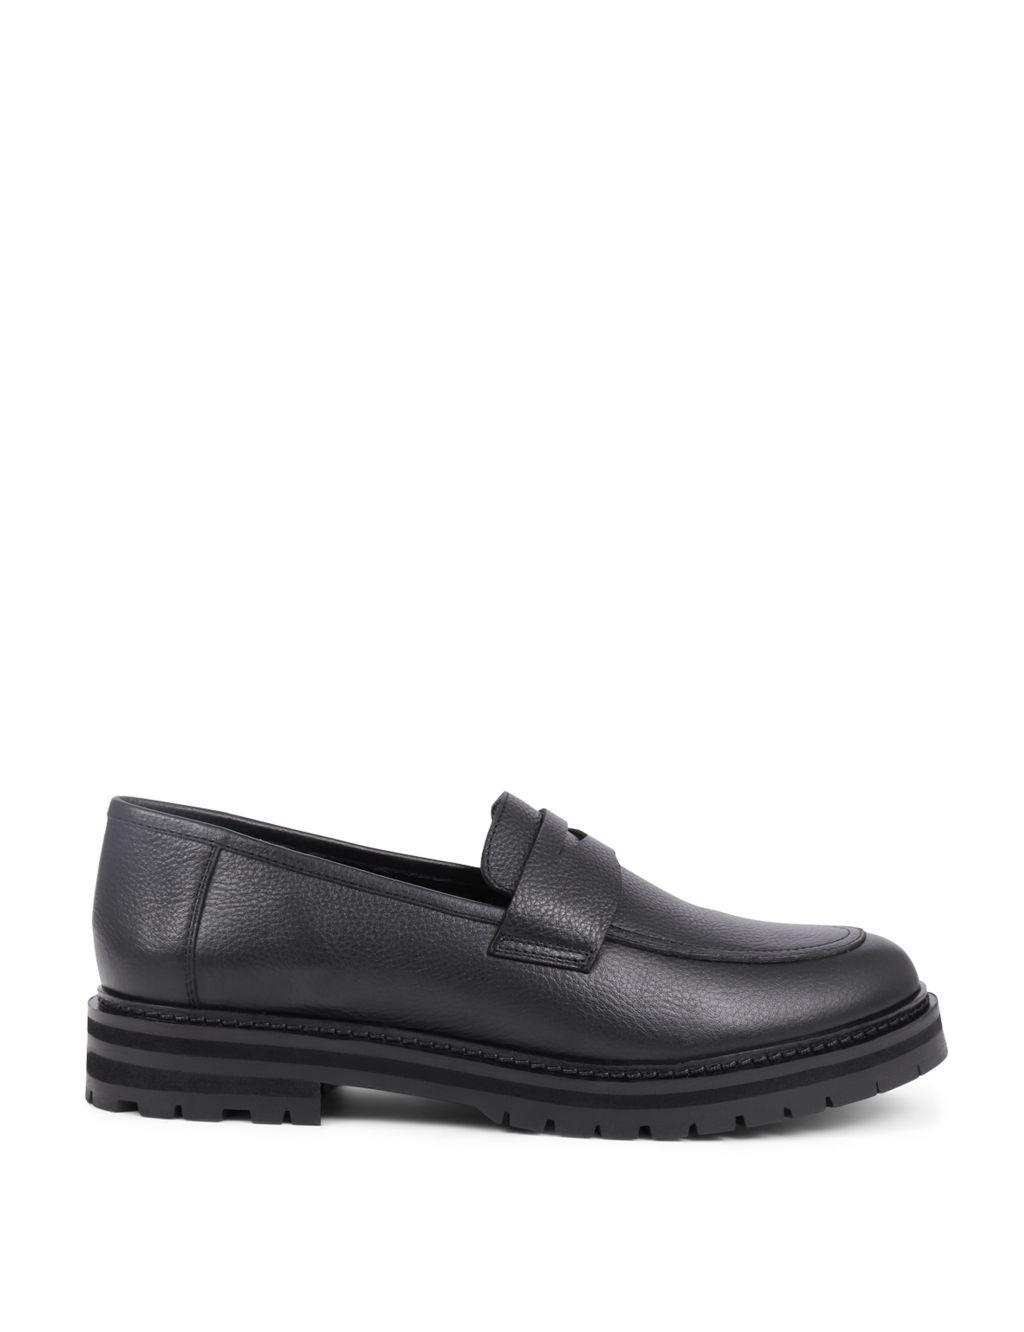 Leather Flat Loafers 1 of 7